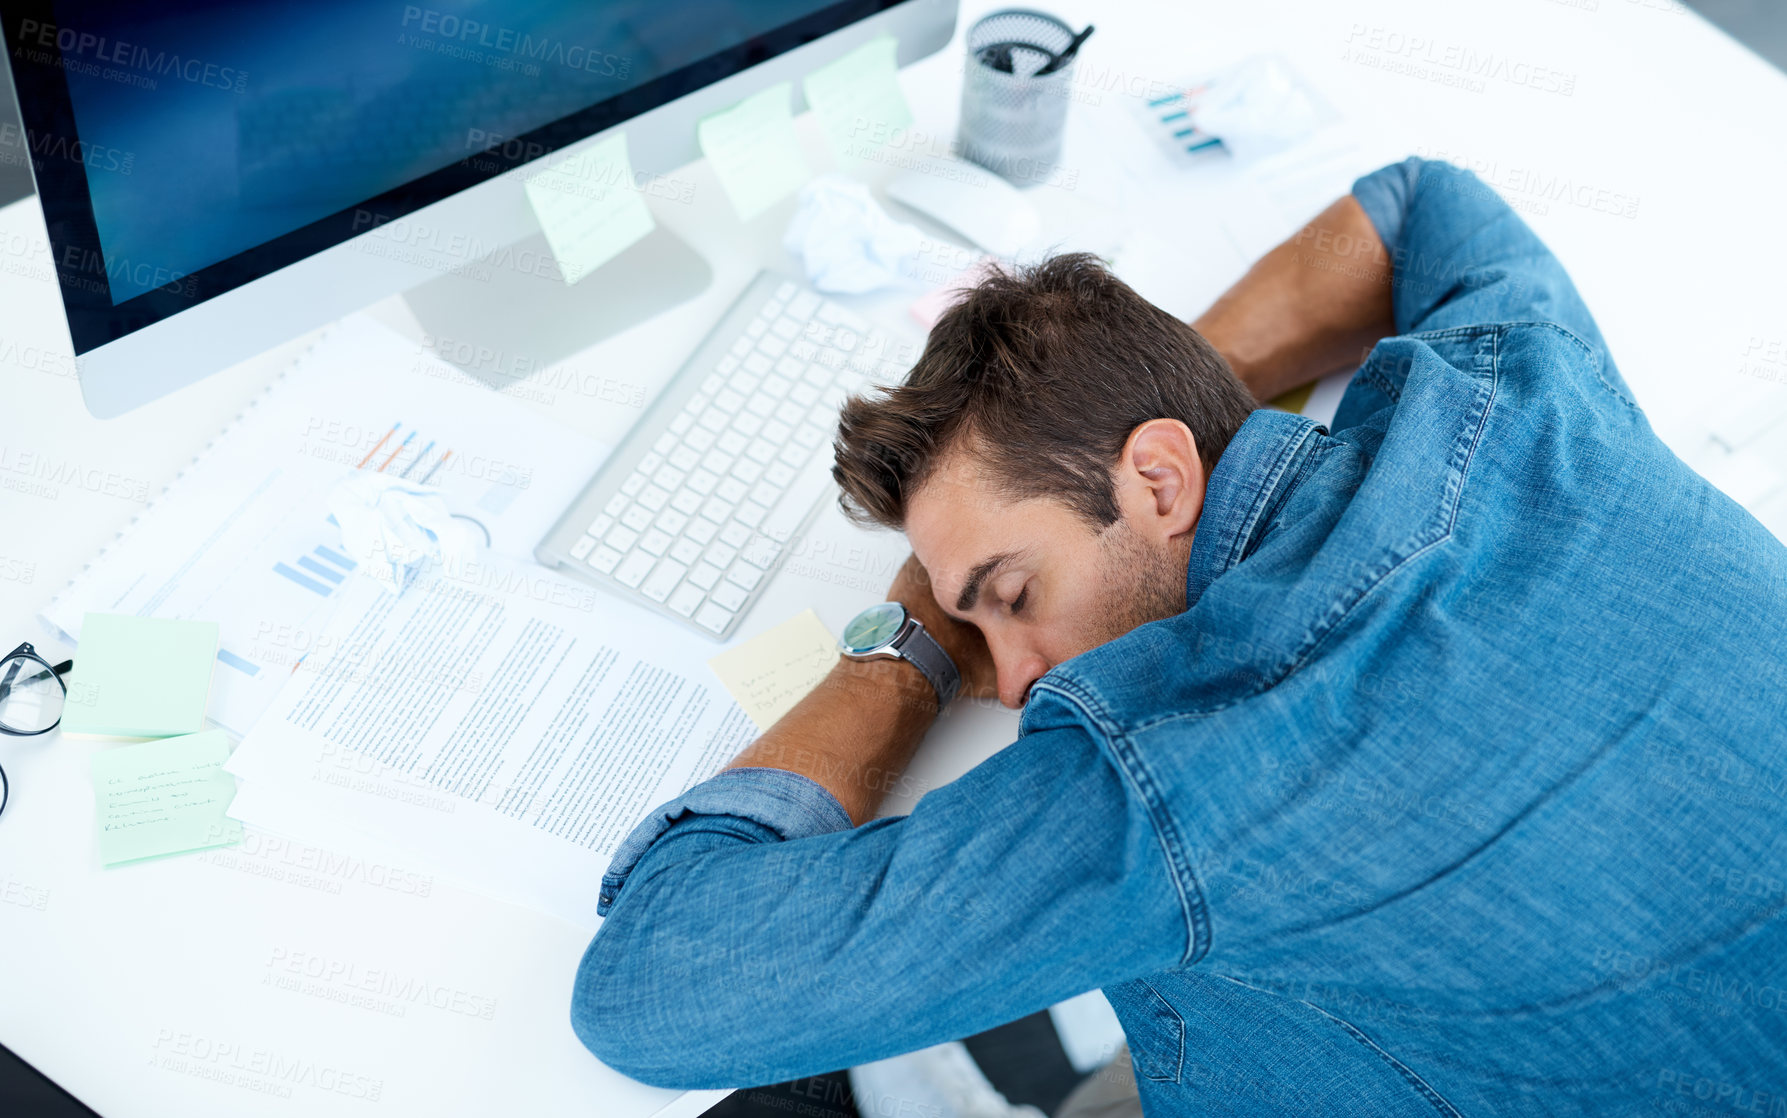 Buy stock photo High angle shot of an exhausted young businessman taking a nap on his desk in his office